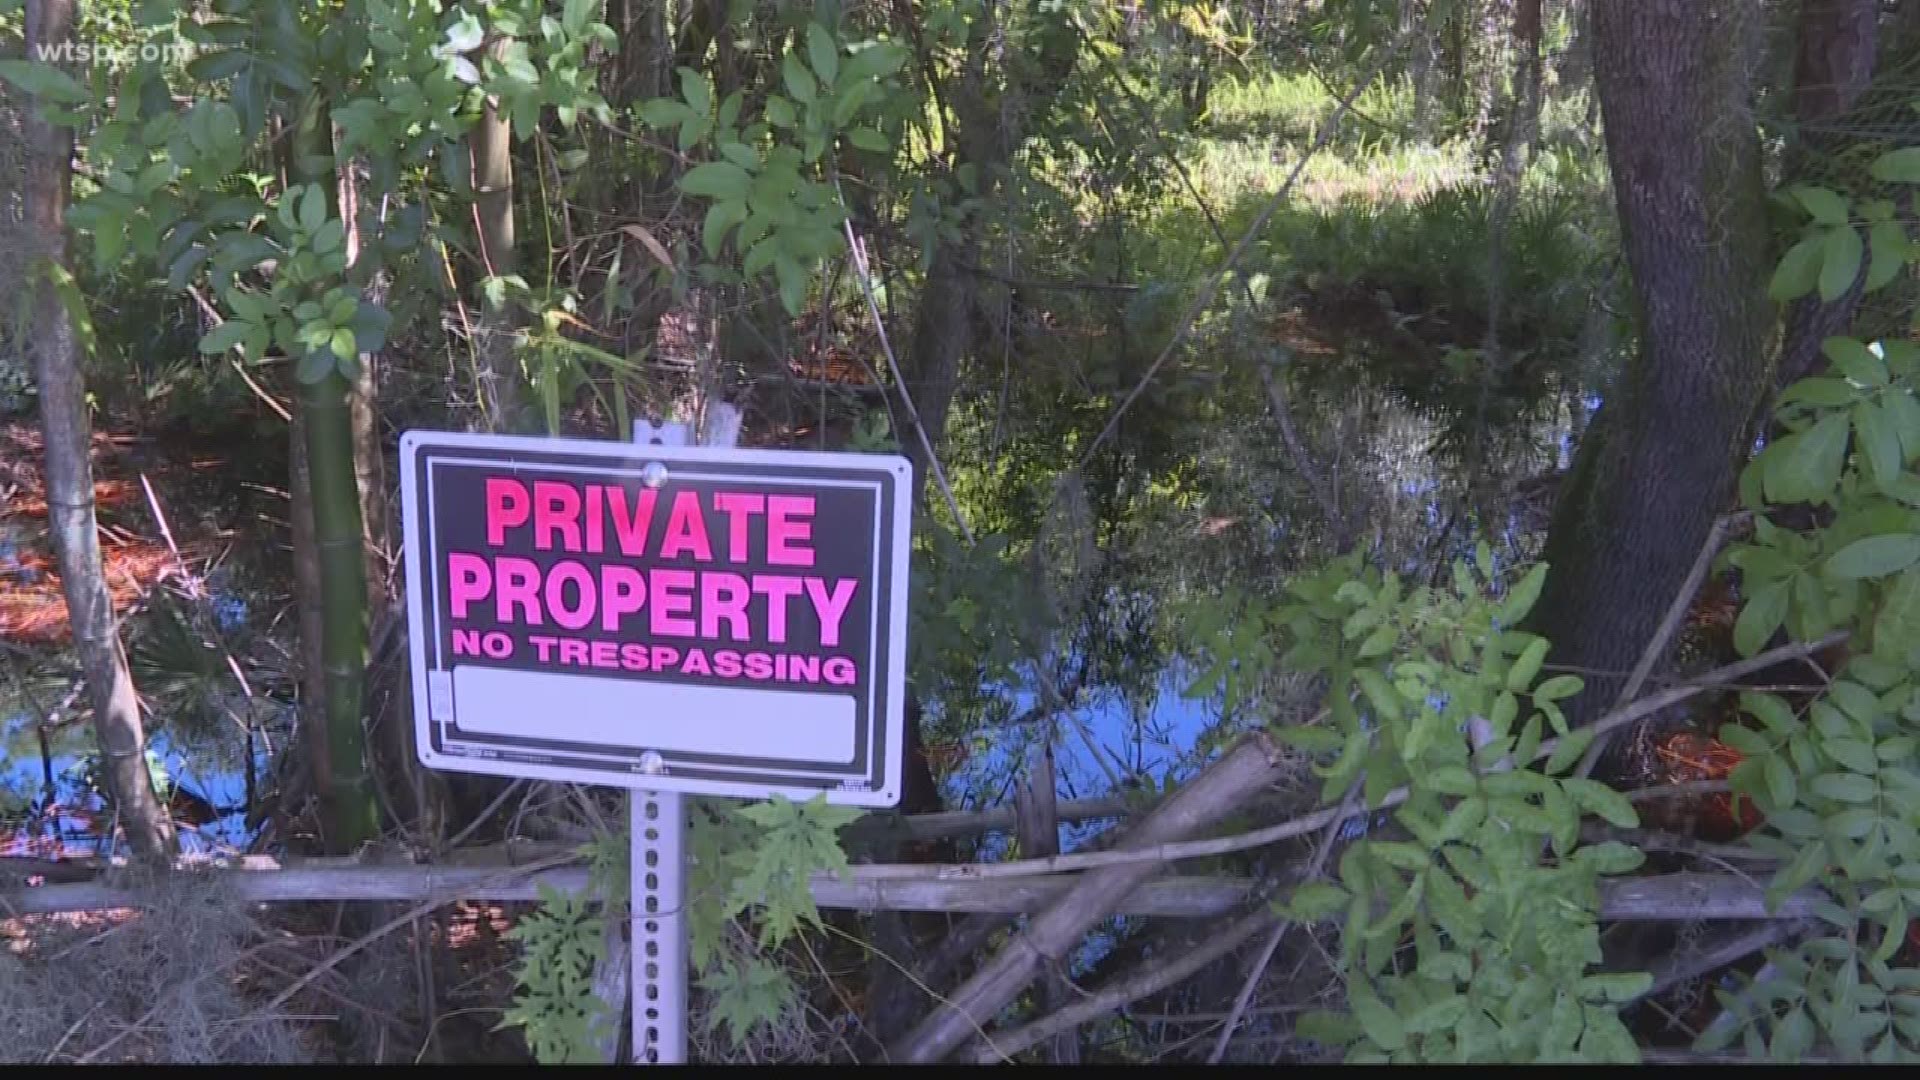 The need for affordable housing in Manatee County is so bad, the county commission will allow a developer to build a large complex on contaminated land.

The development will sit along State Road 70, and will be home to 92 new one, two and three-bedroom units.

https://on.wtsp.com/2P9R5iq